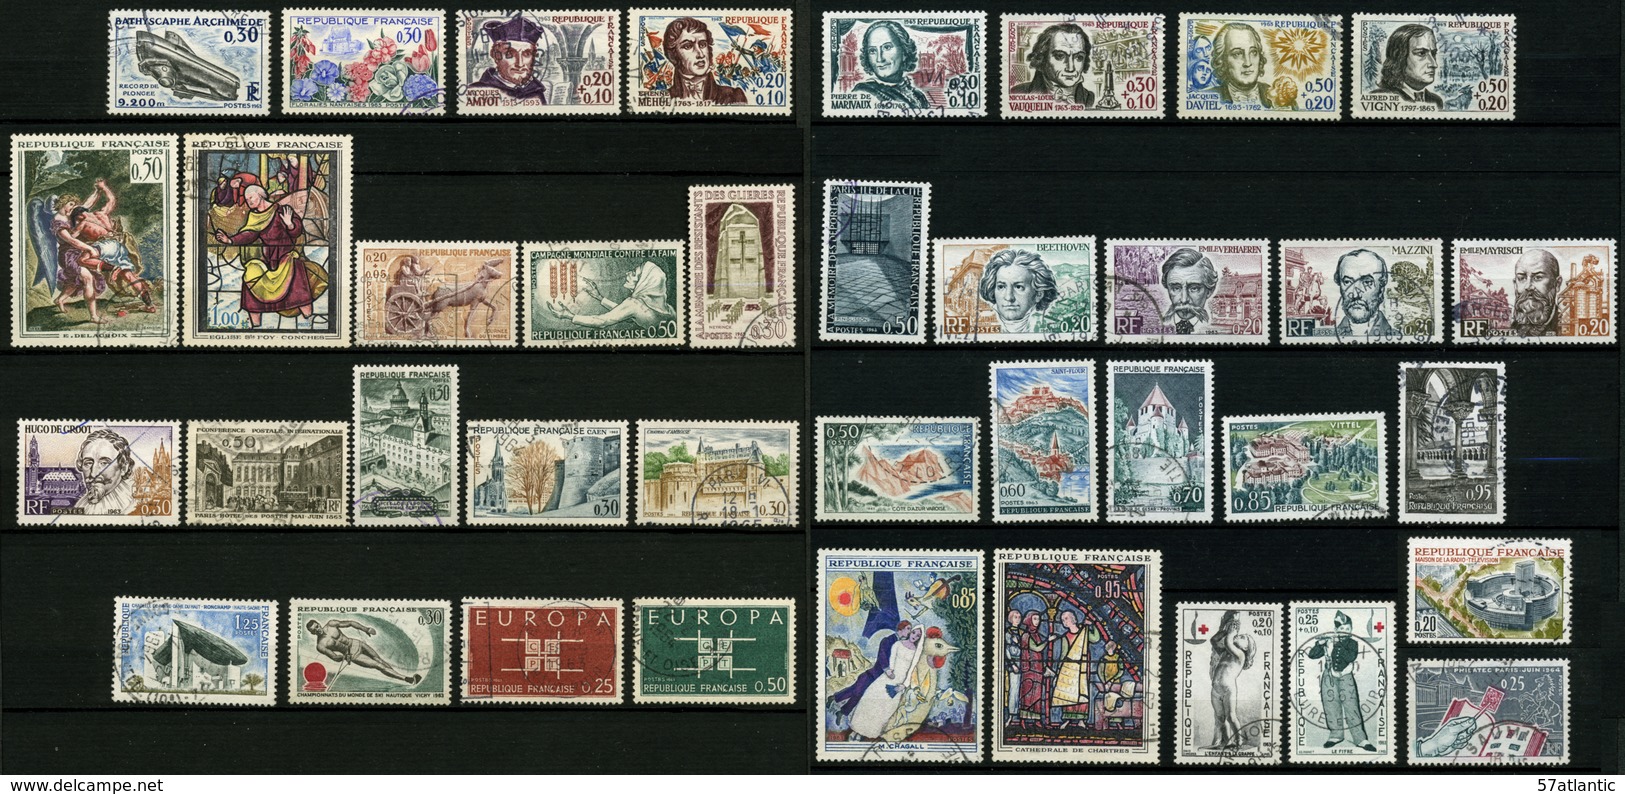 FRANCE - ANNEE COMPLETE 1963 - YT 1368 à 1403 - 38 TIMBRES OBLITERES - 1960-1969